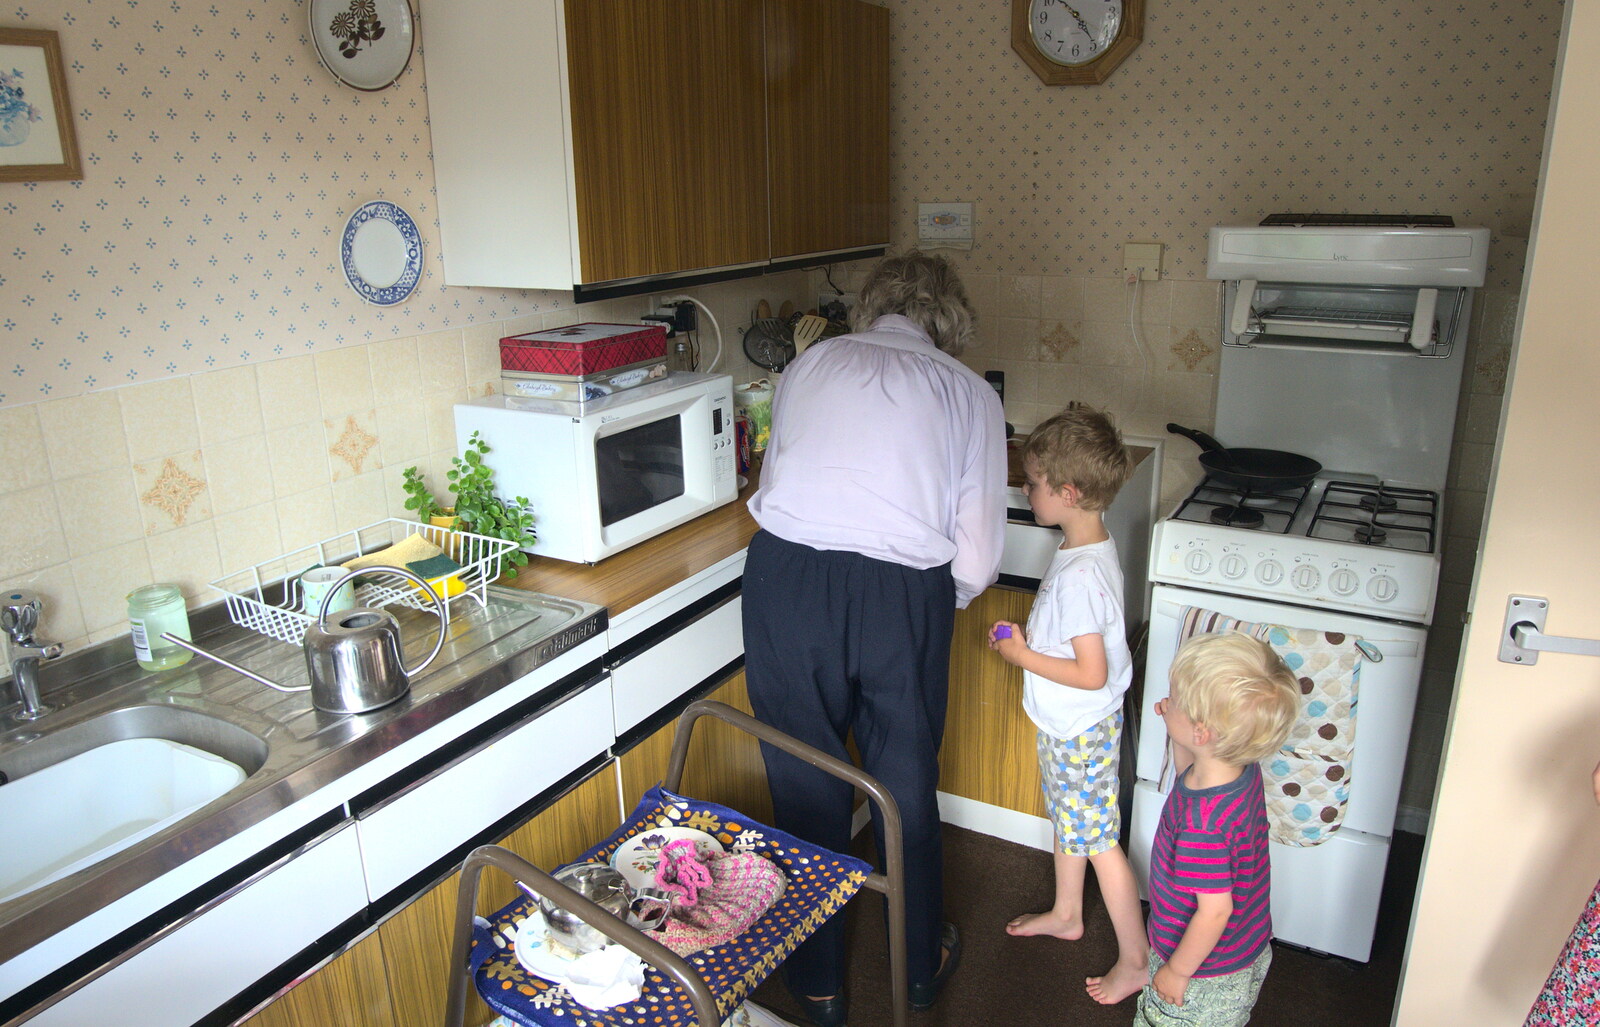 In grandmother's kitchen from Bob and Bernice's 50th Wedding Anniversary, Hinton Admiral, Dorset - 25th July 2014